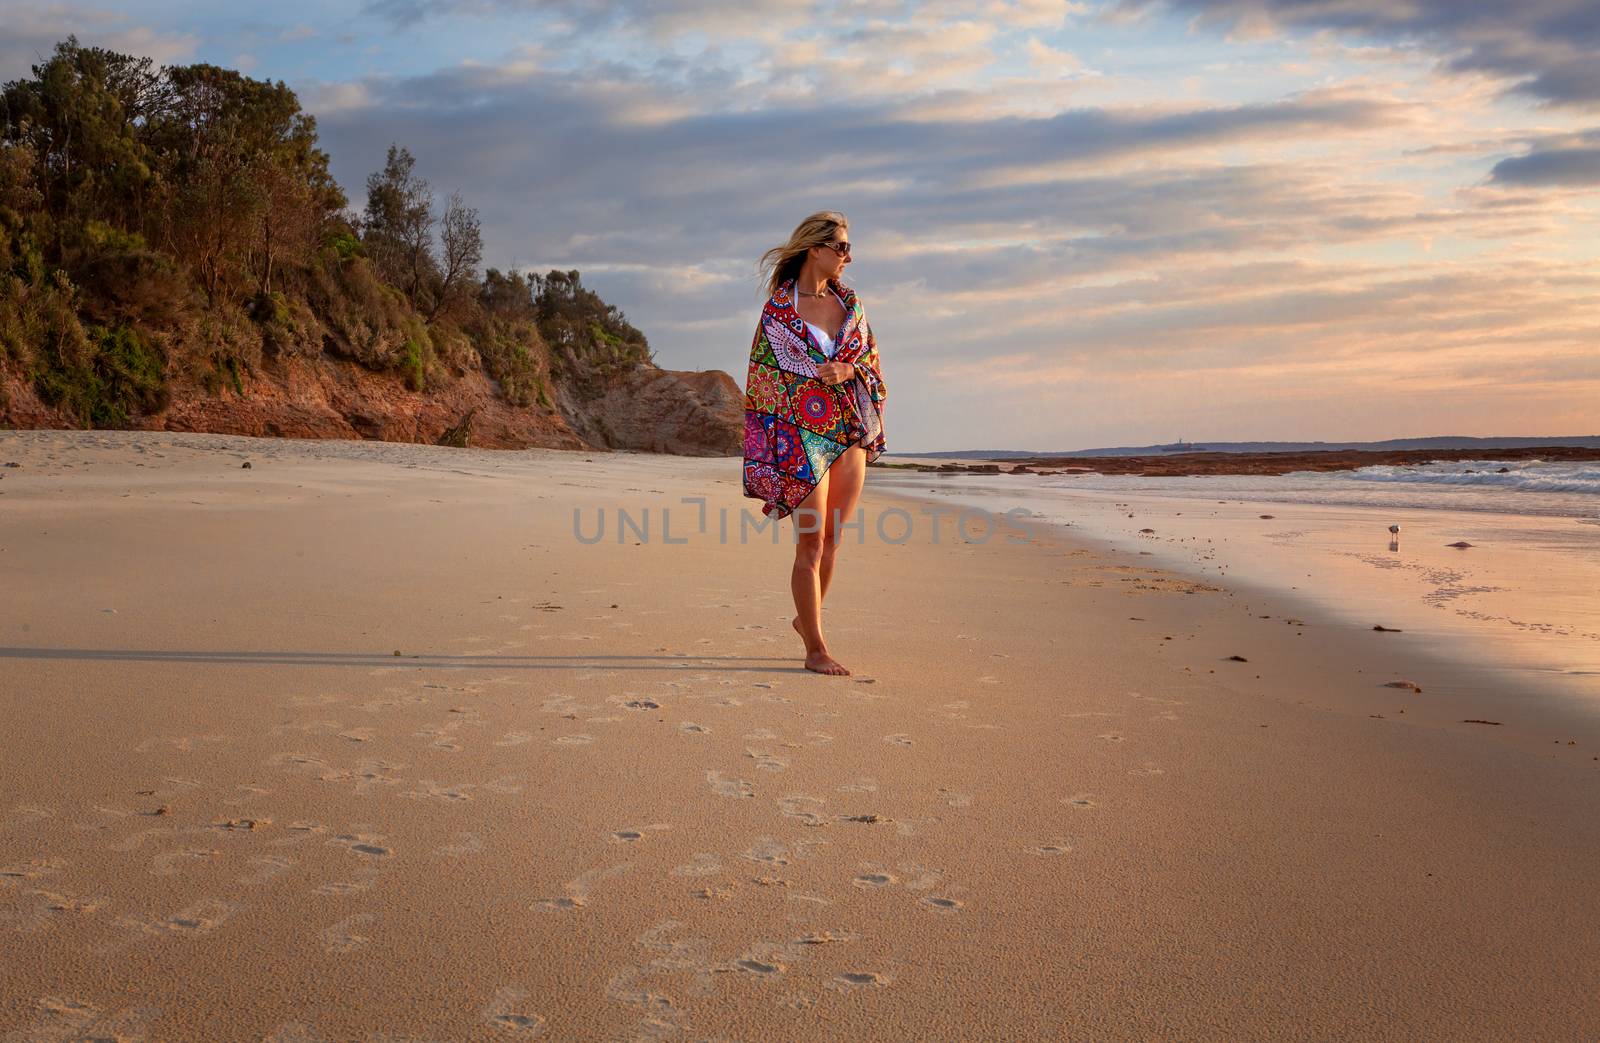 Female in bikini with a beach towel wrapped loosely around her walks along the beach in the early morning with soft breeze in her hair as she gazes towards the sun